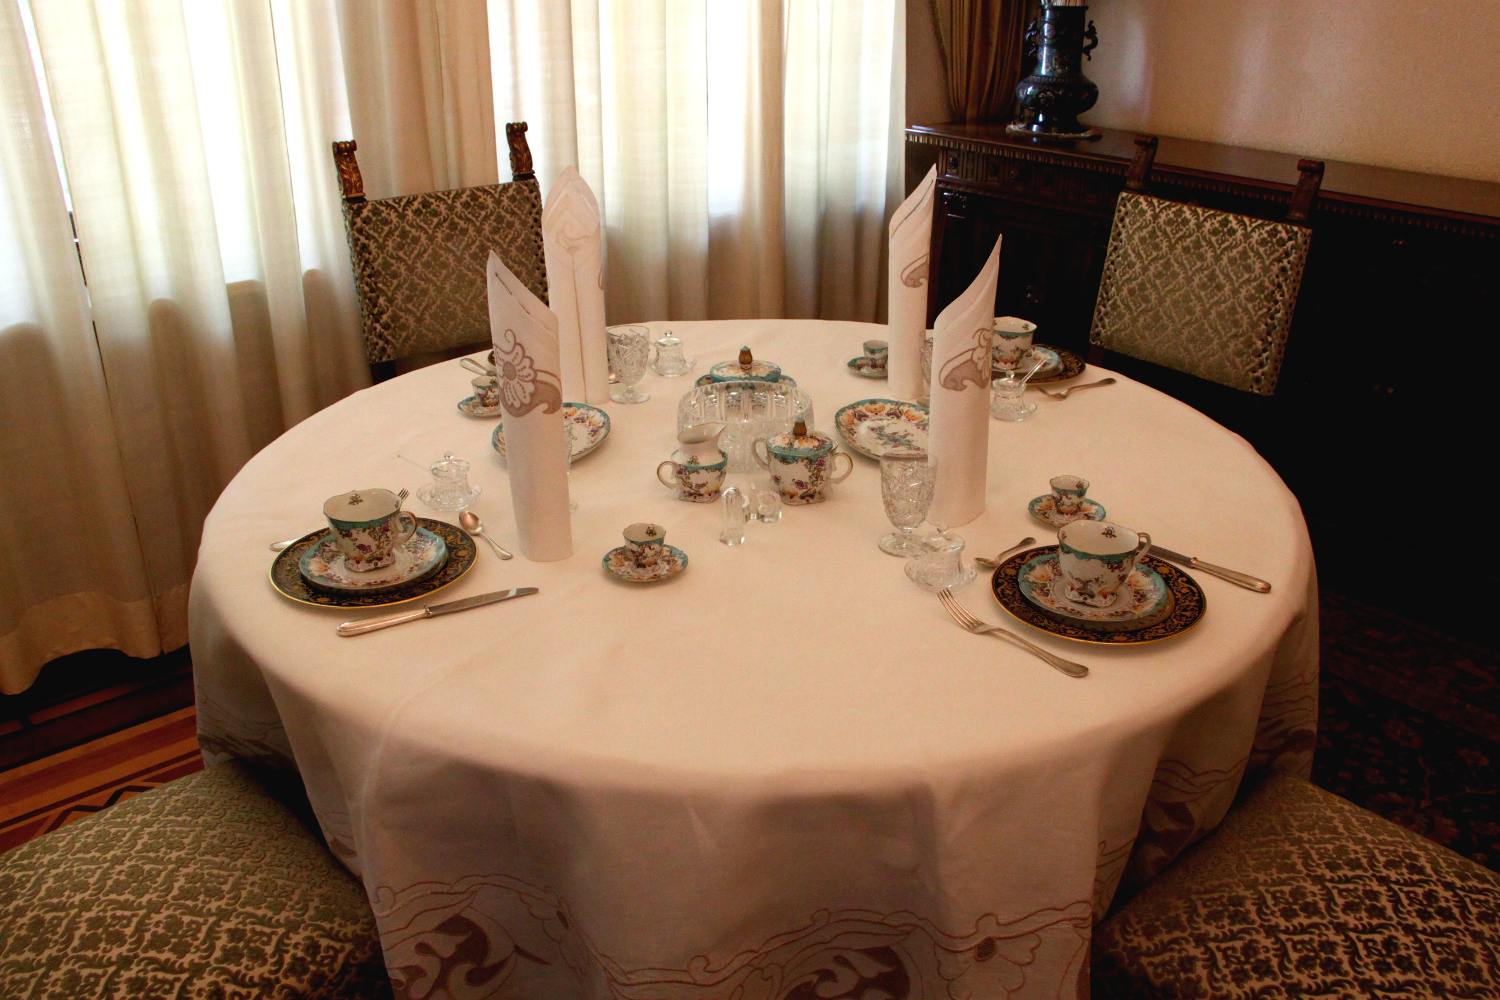 Primaverii (Spring) Palace, Ceausescu’s private residence - the small table they actually used to eat